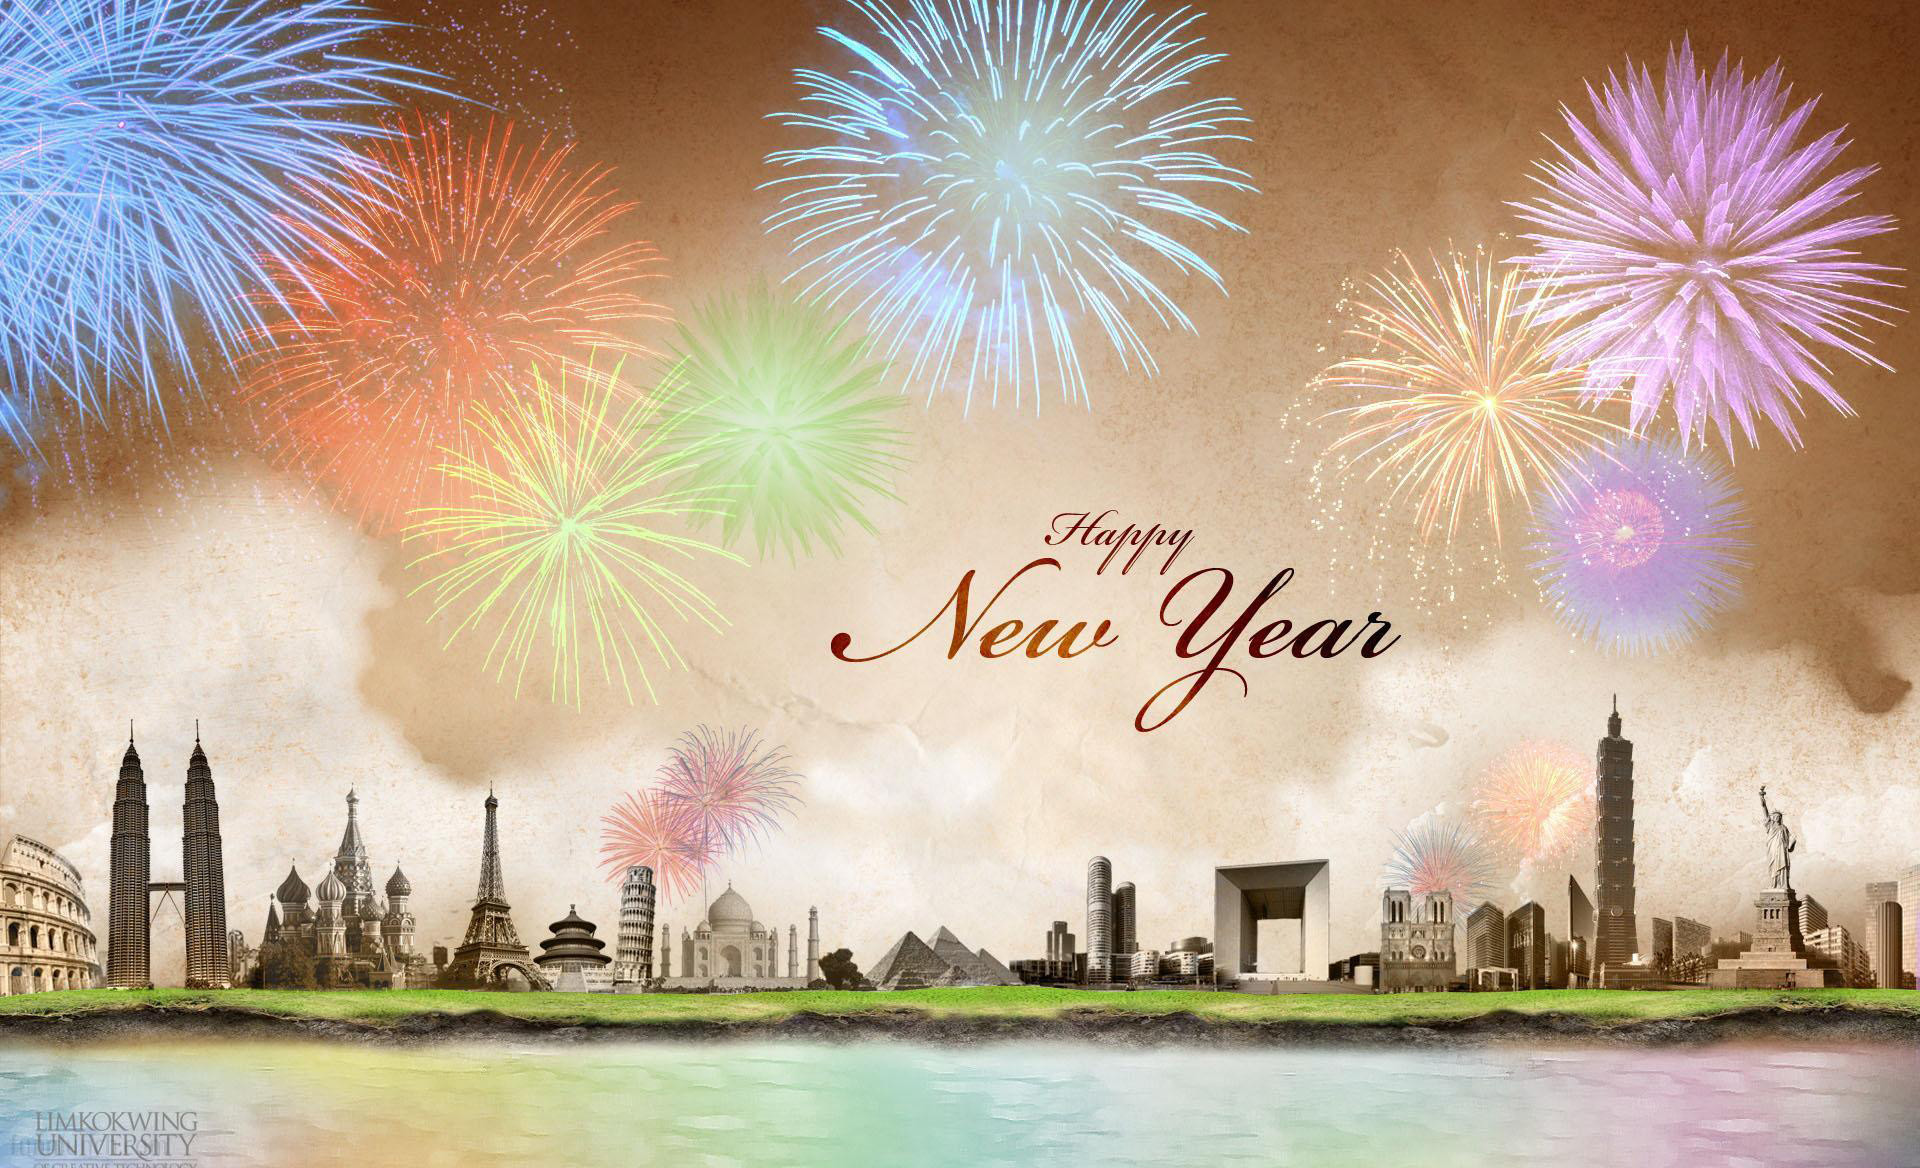 1920x1168 Happy New Year Backgrounds Free Download.